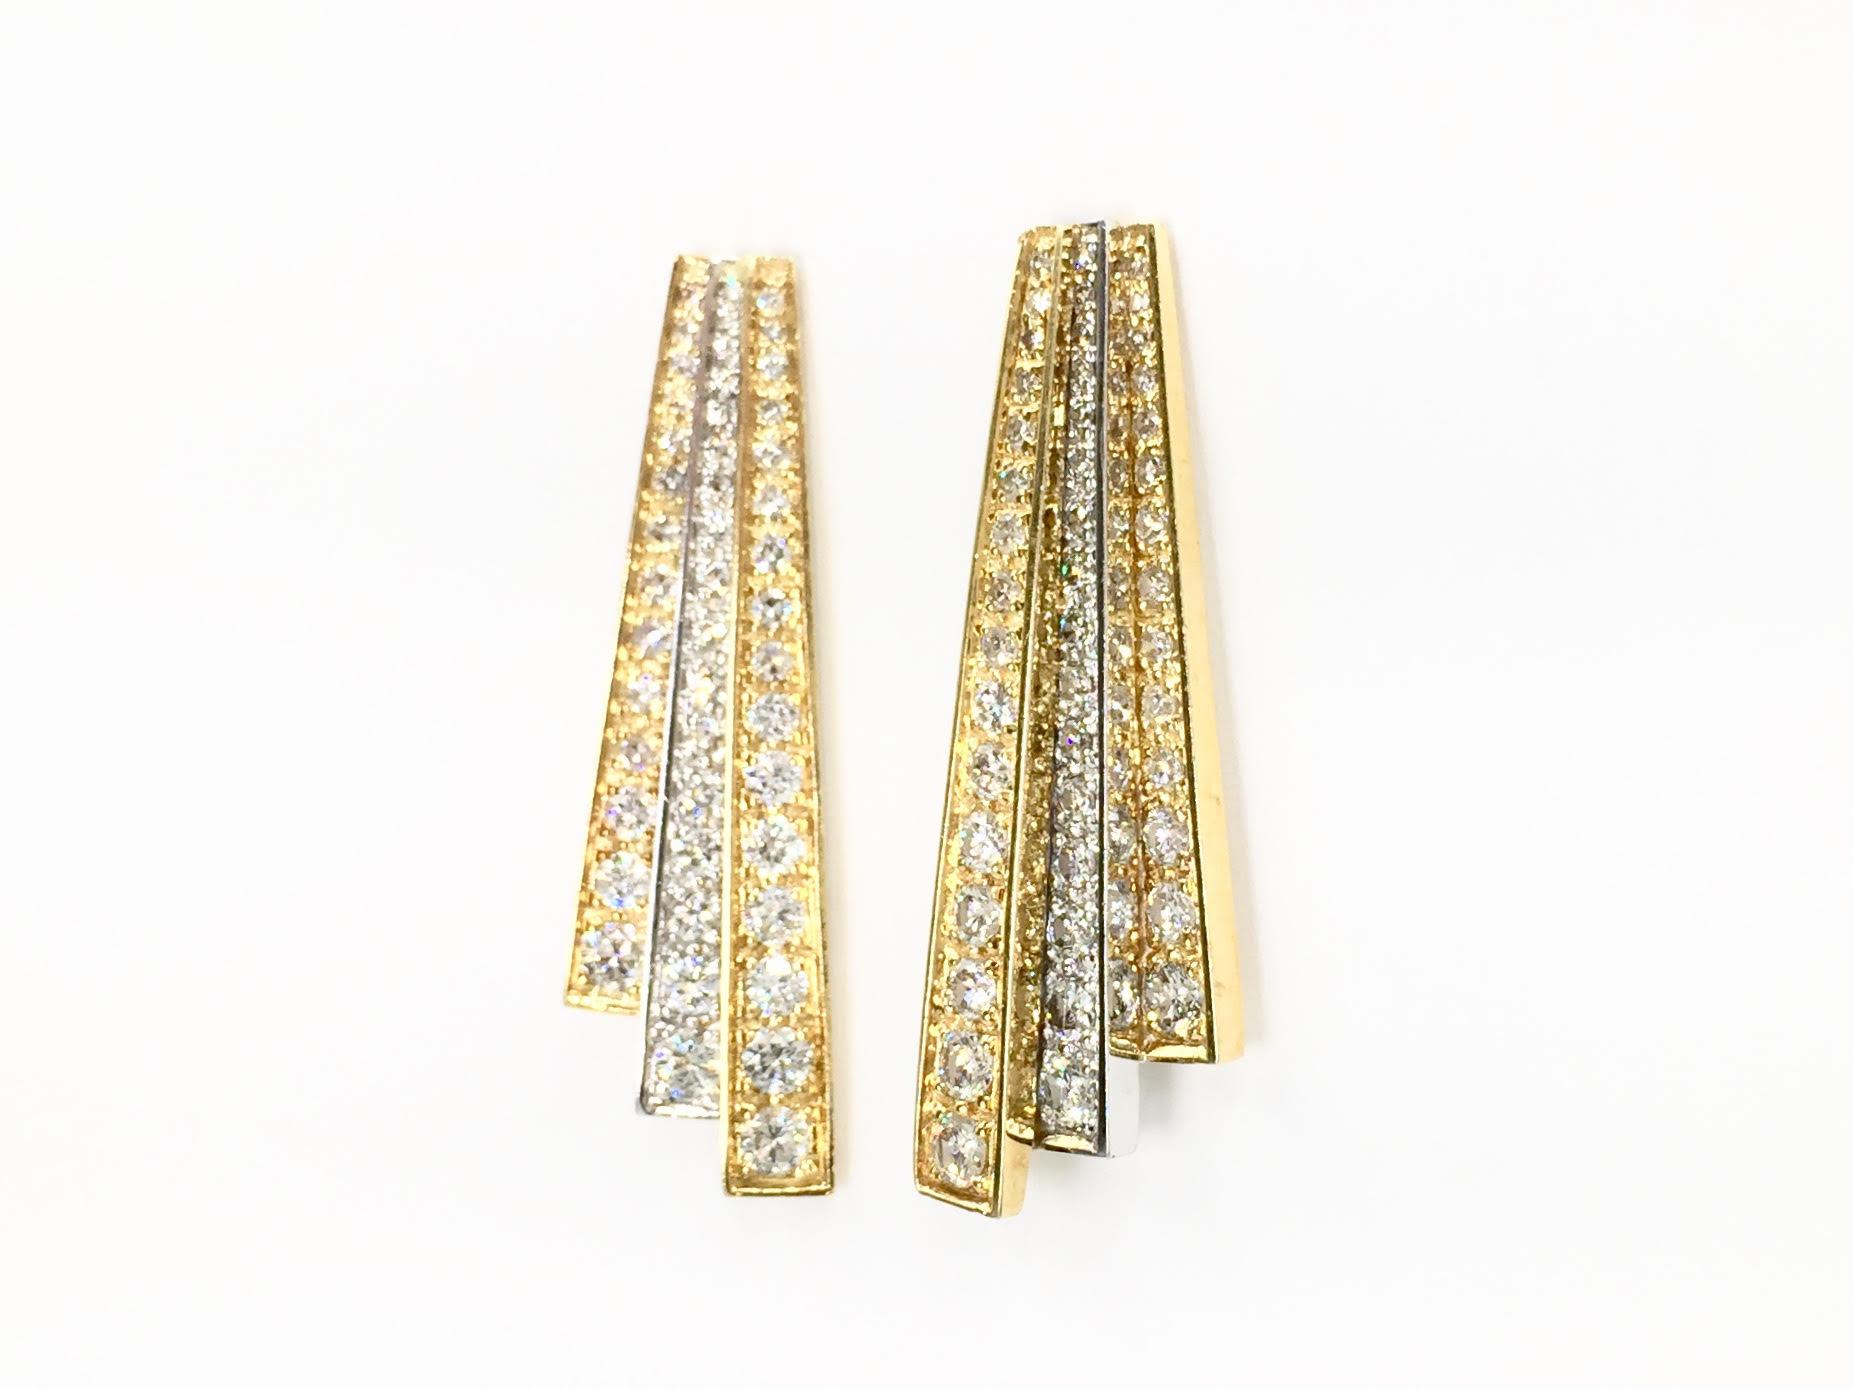 Clean and classic Art Deco inspired 18 karat two tone drop earrings with three rows of diamonds, approximately 3.50 carats total weight. Each earring contains 46 beautiful round brilliant diamonds at approximately G color, SI1 clarity. Earrings have